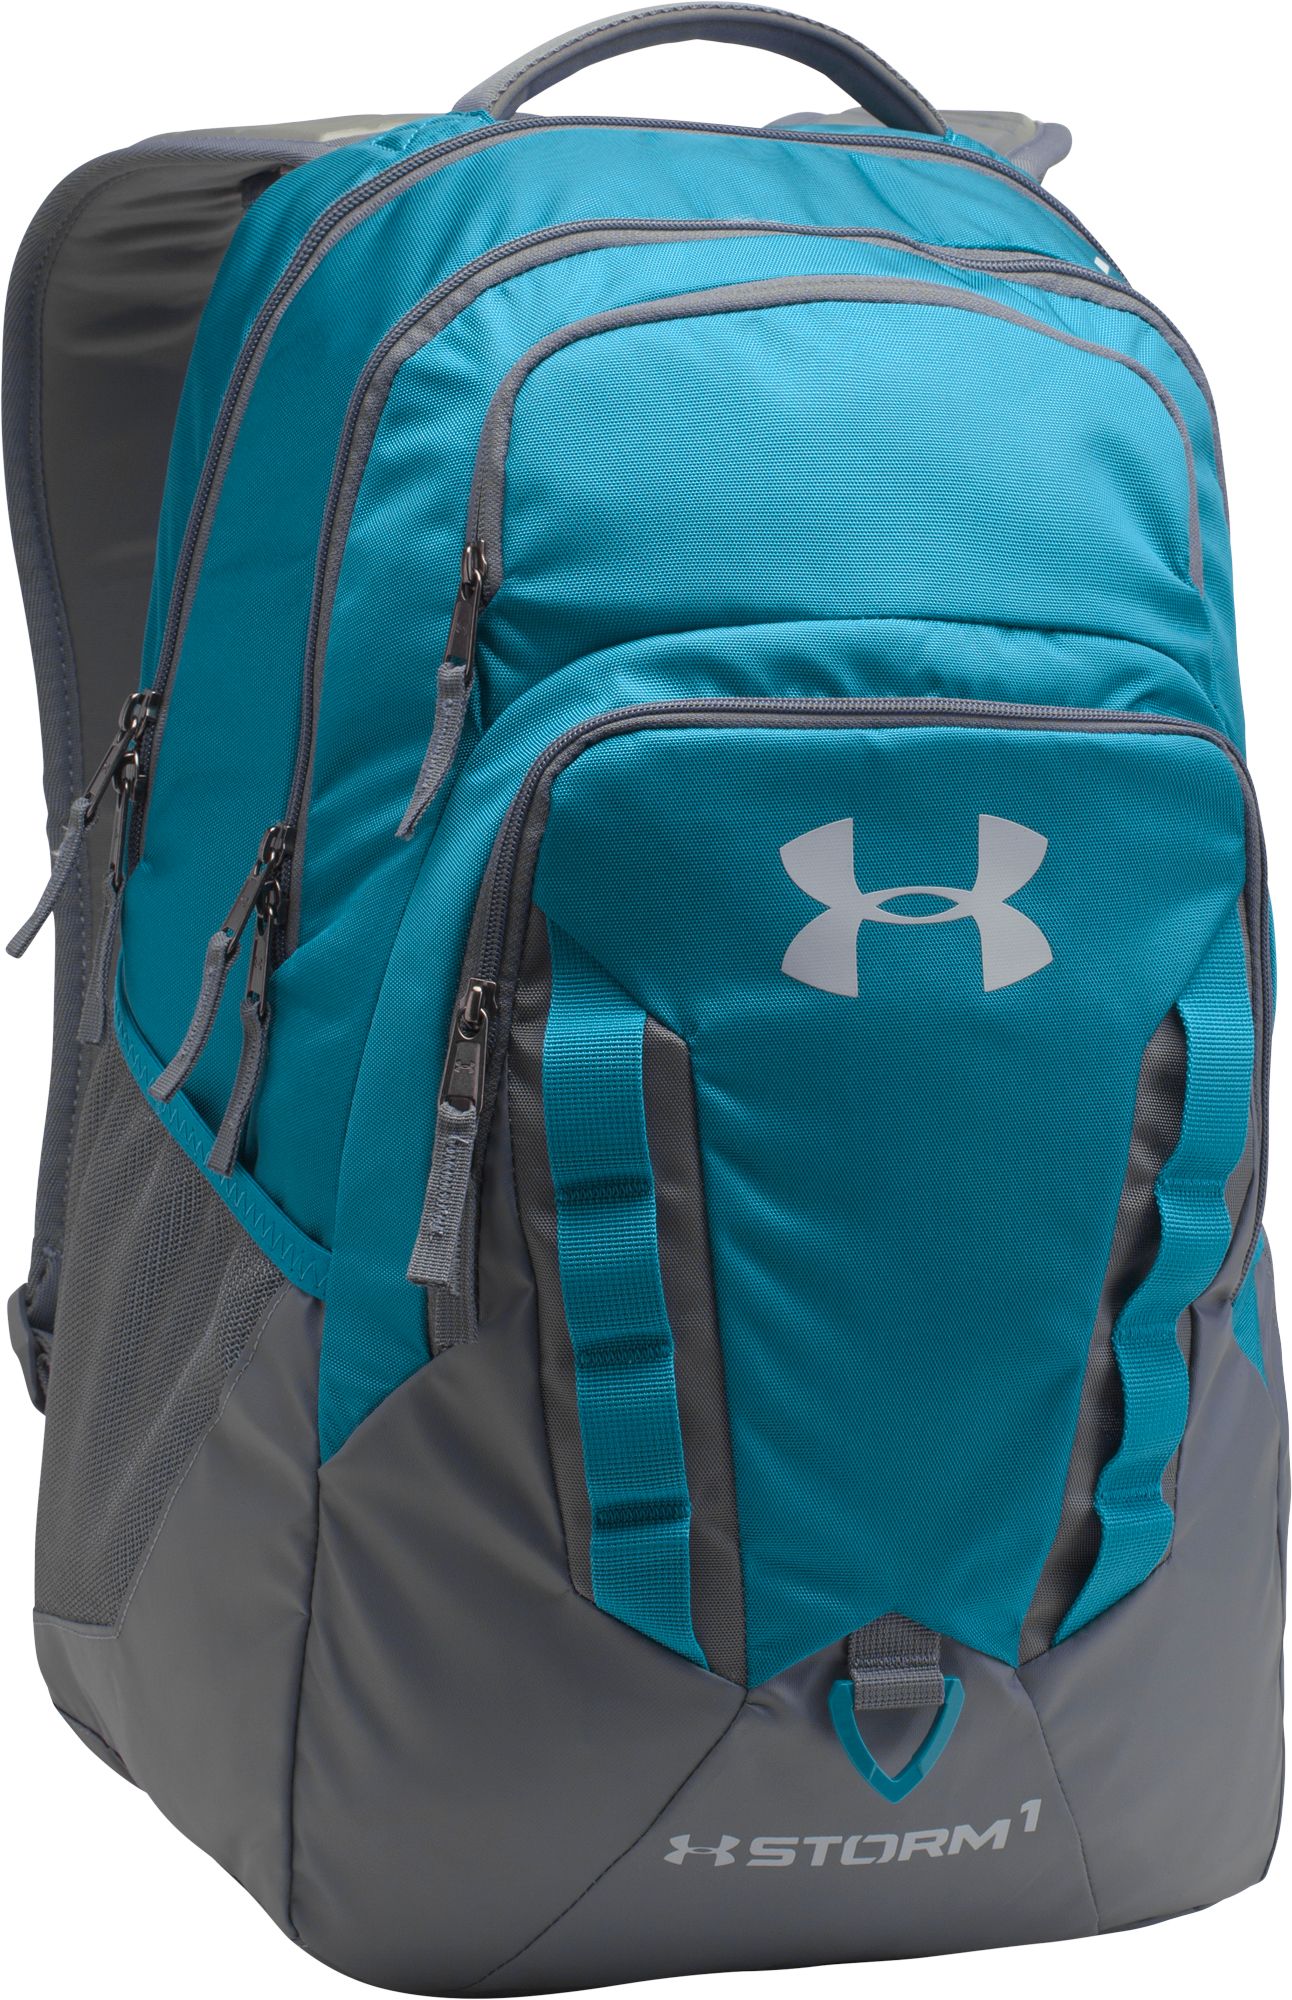 Sports Backpacks & Gym Bags | DICK'S Sporting Goods